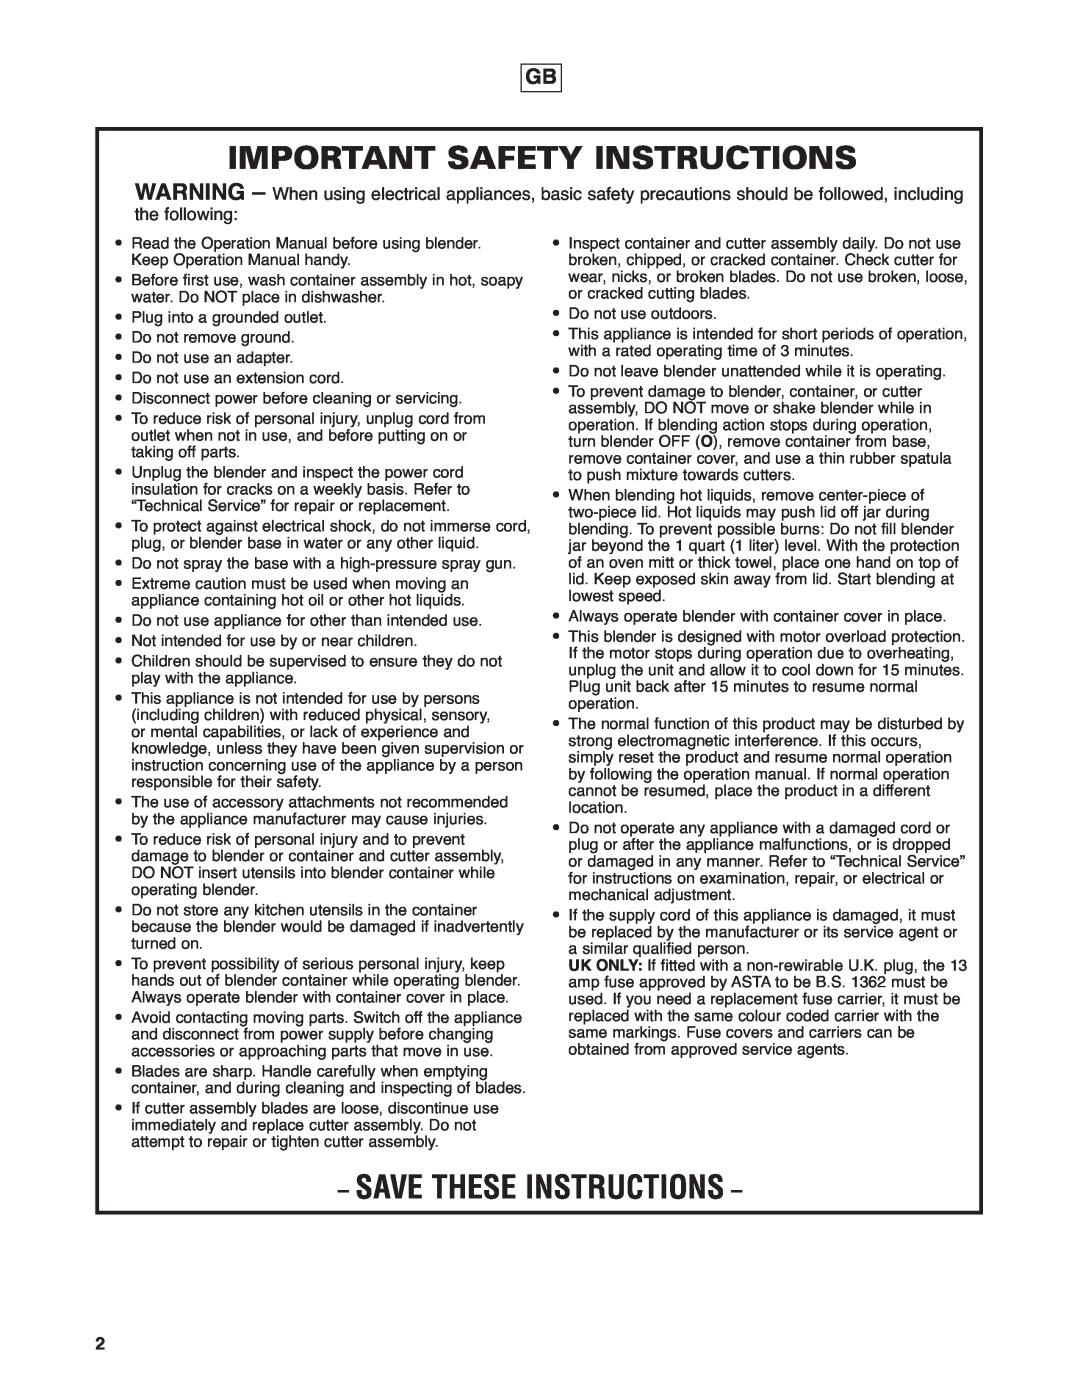 Hamilton Beach HBF400 operation manual Important Safety Instructions, Save These Instructions, the following 